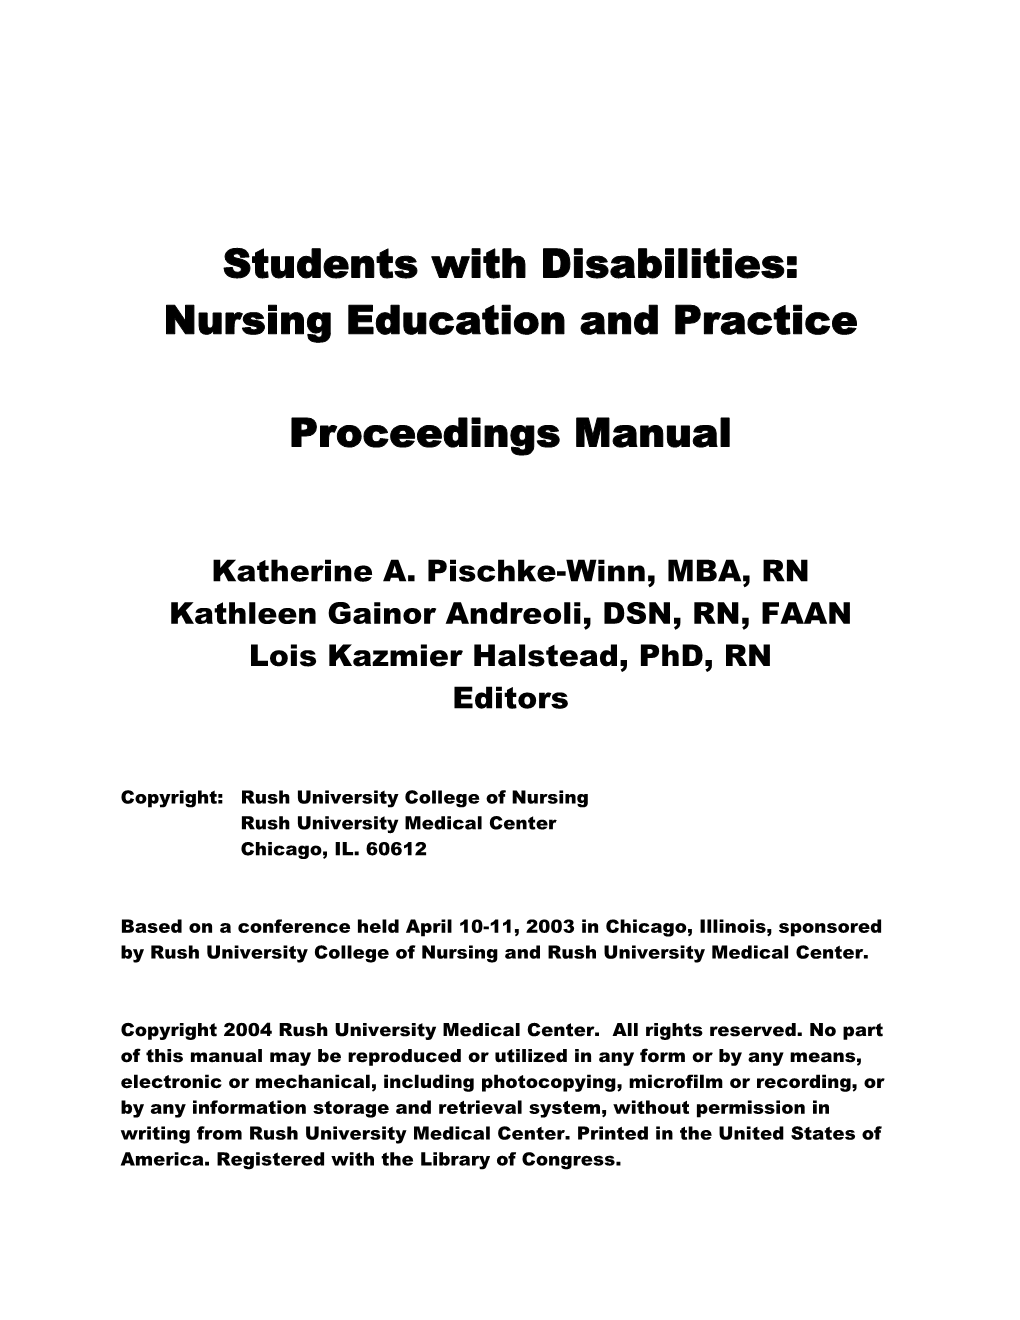 Students with Disabilities: Nursing Education and Practice